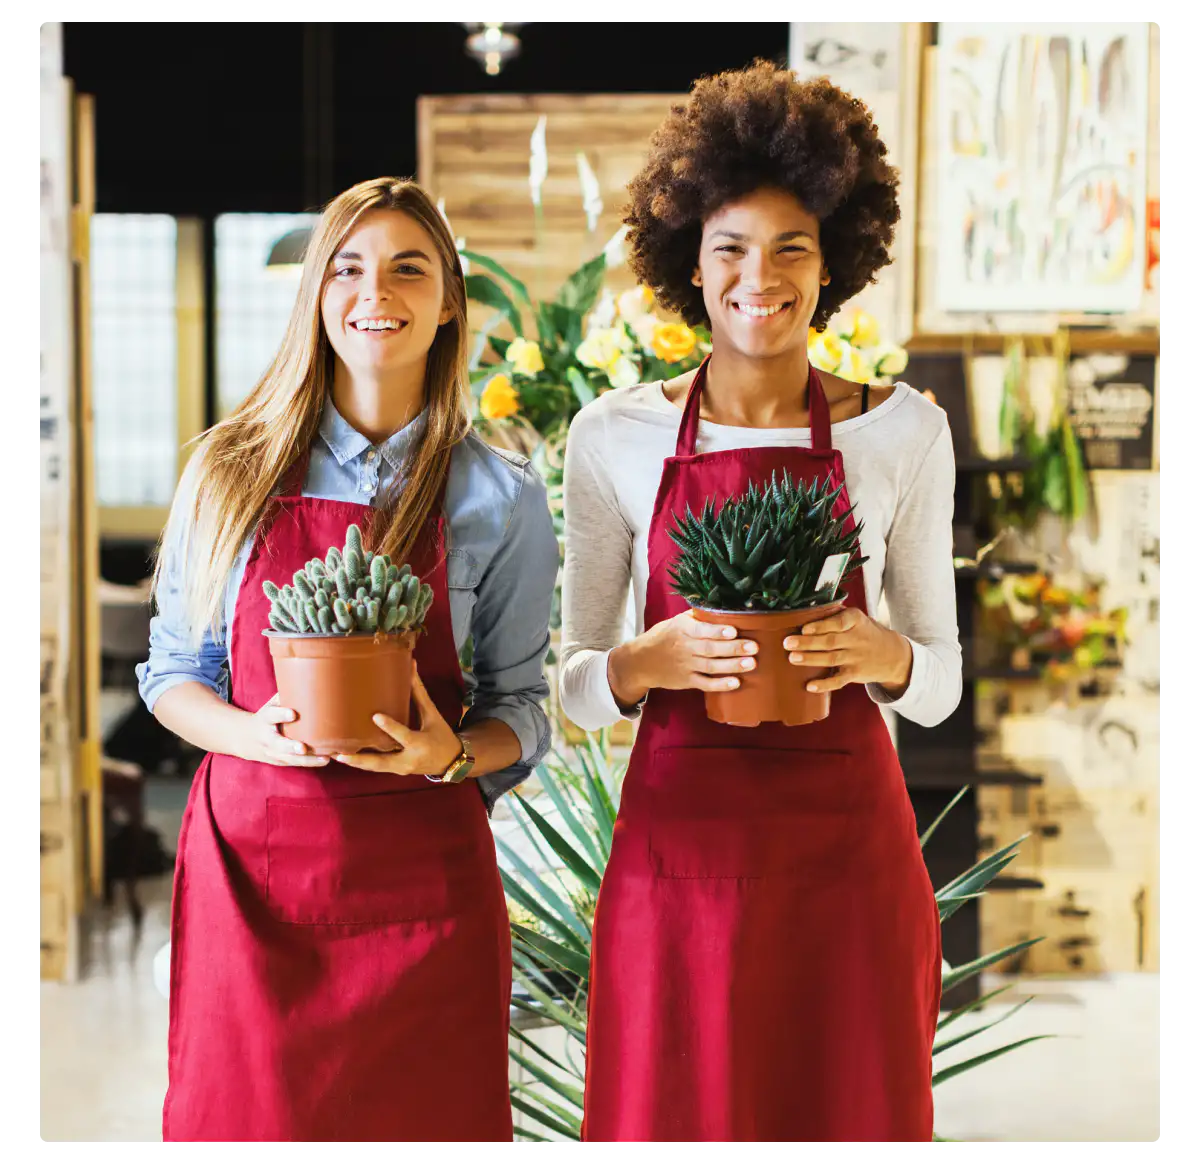 An image of smiling employees holding plants at a flower shop.